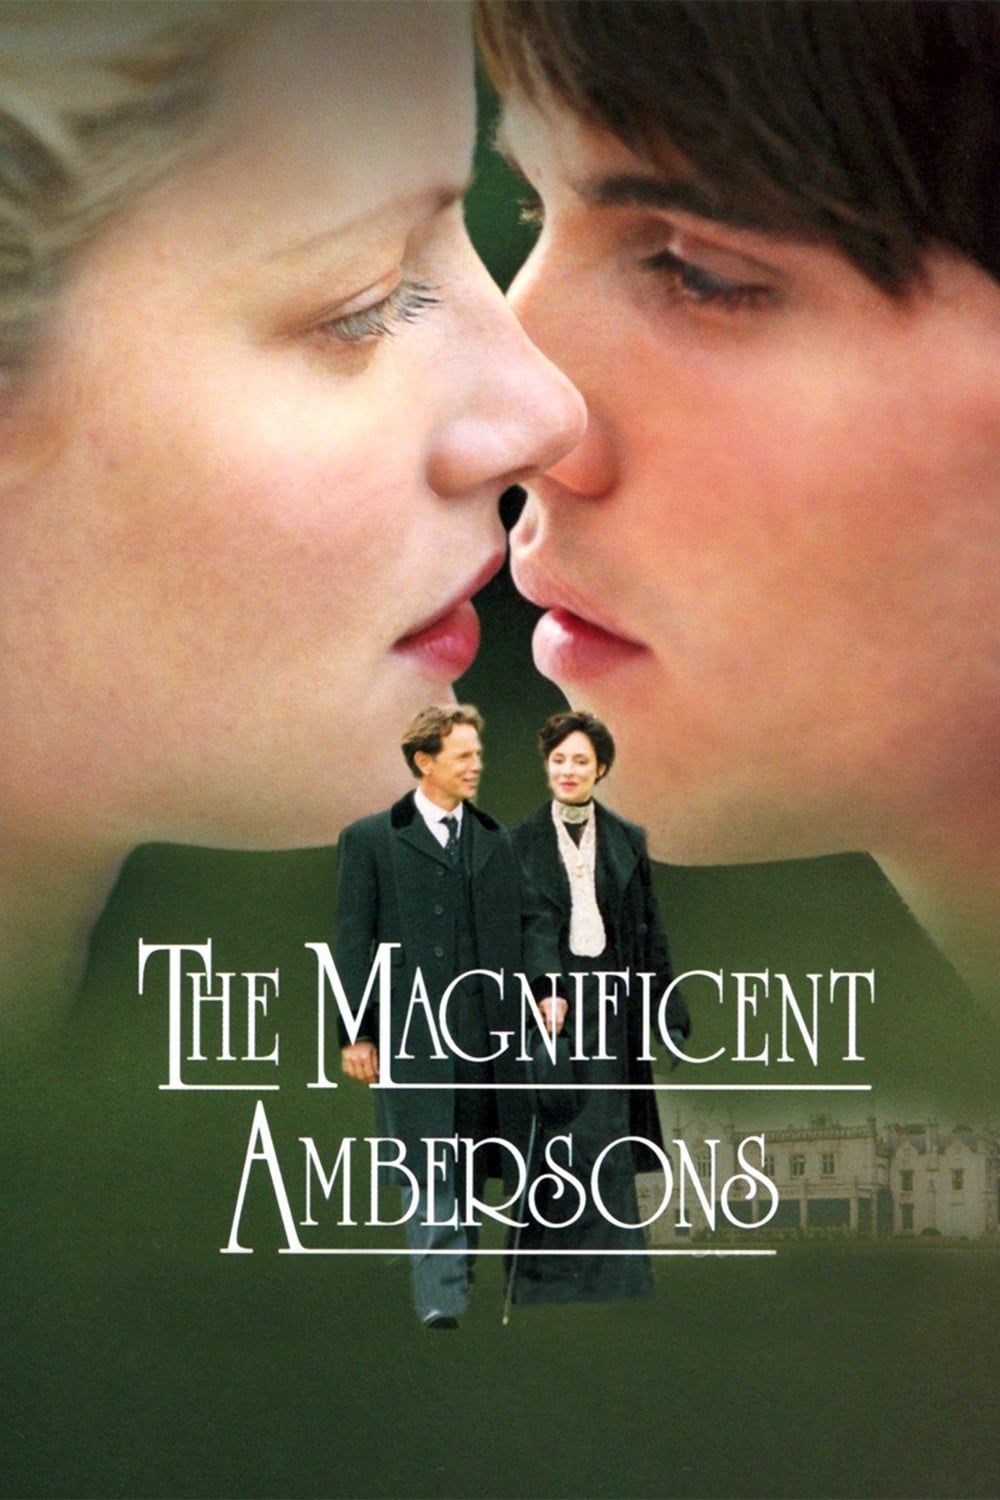 The Magnificent Ambersons (2002)